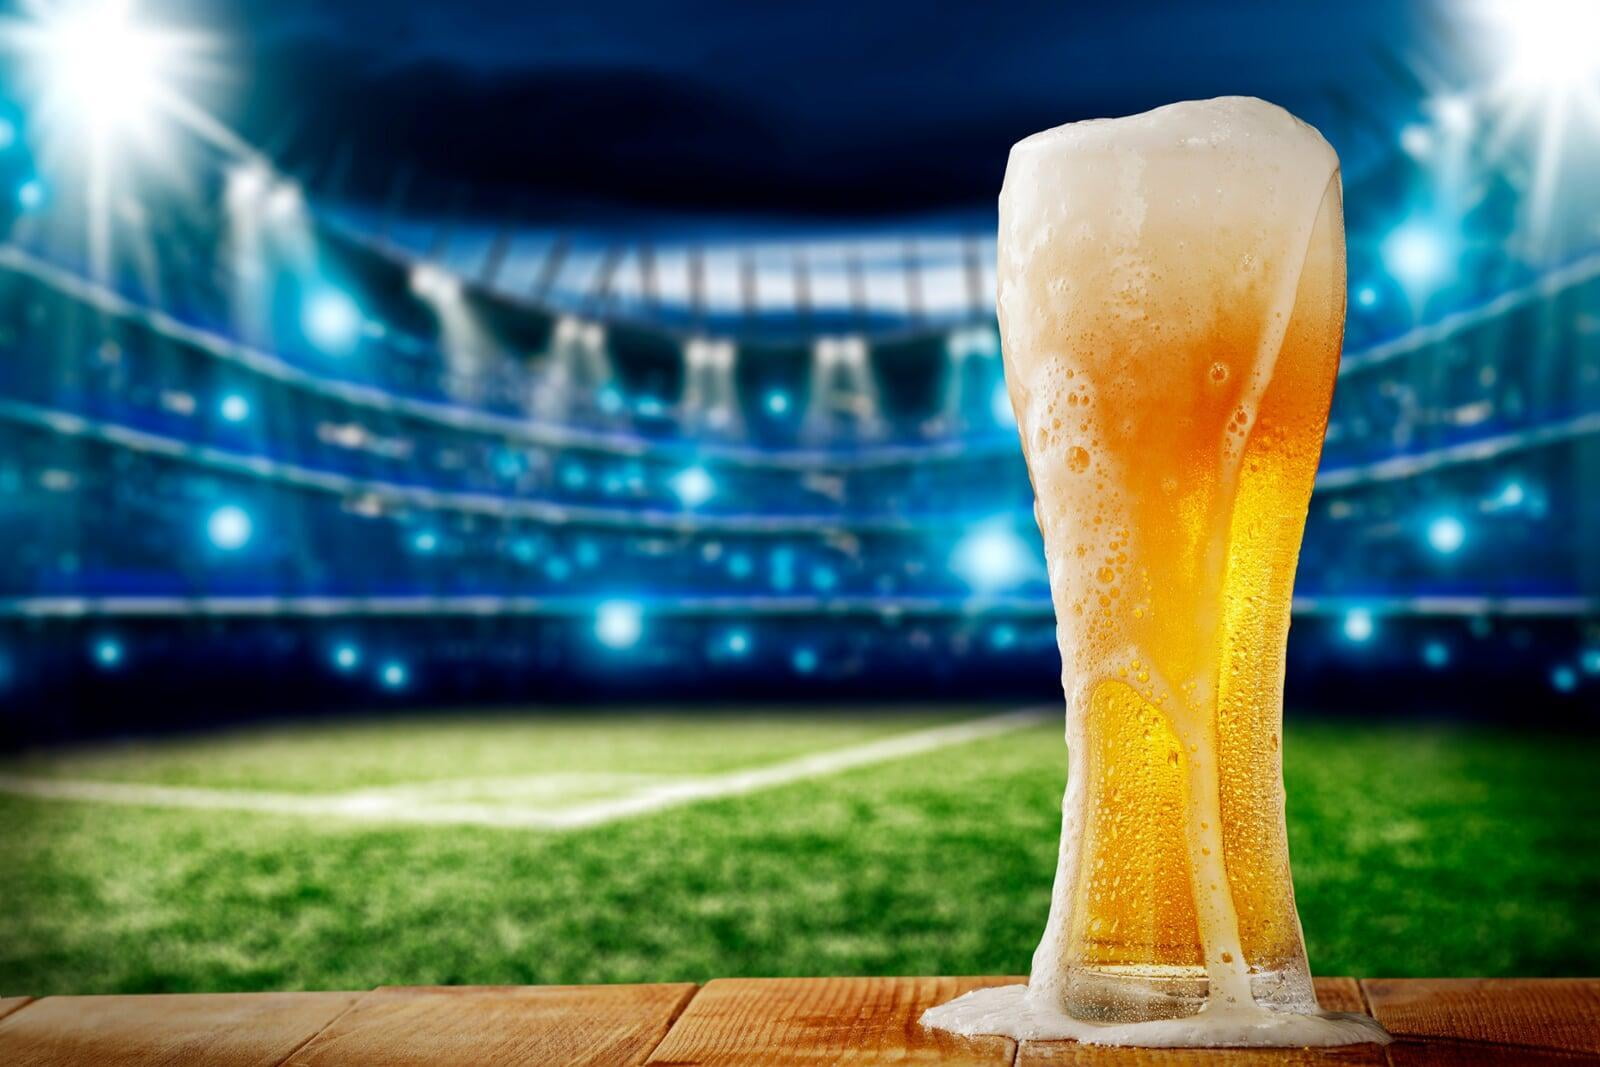 Some Dems Hesitant To Cheer Over Alcohol In 'U' Stadiums